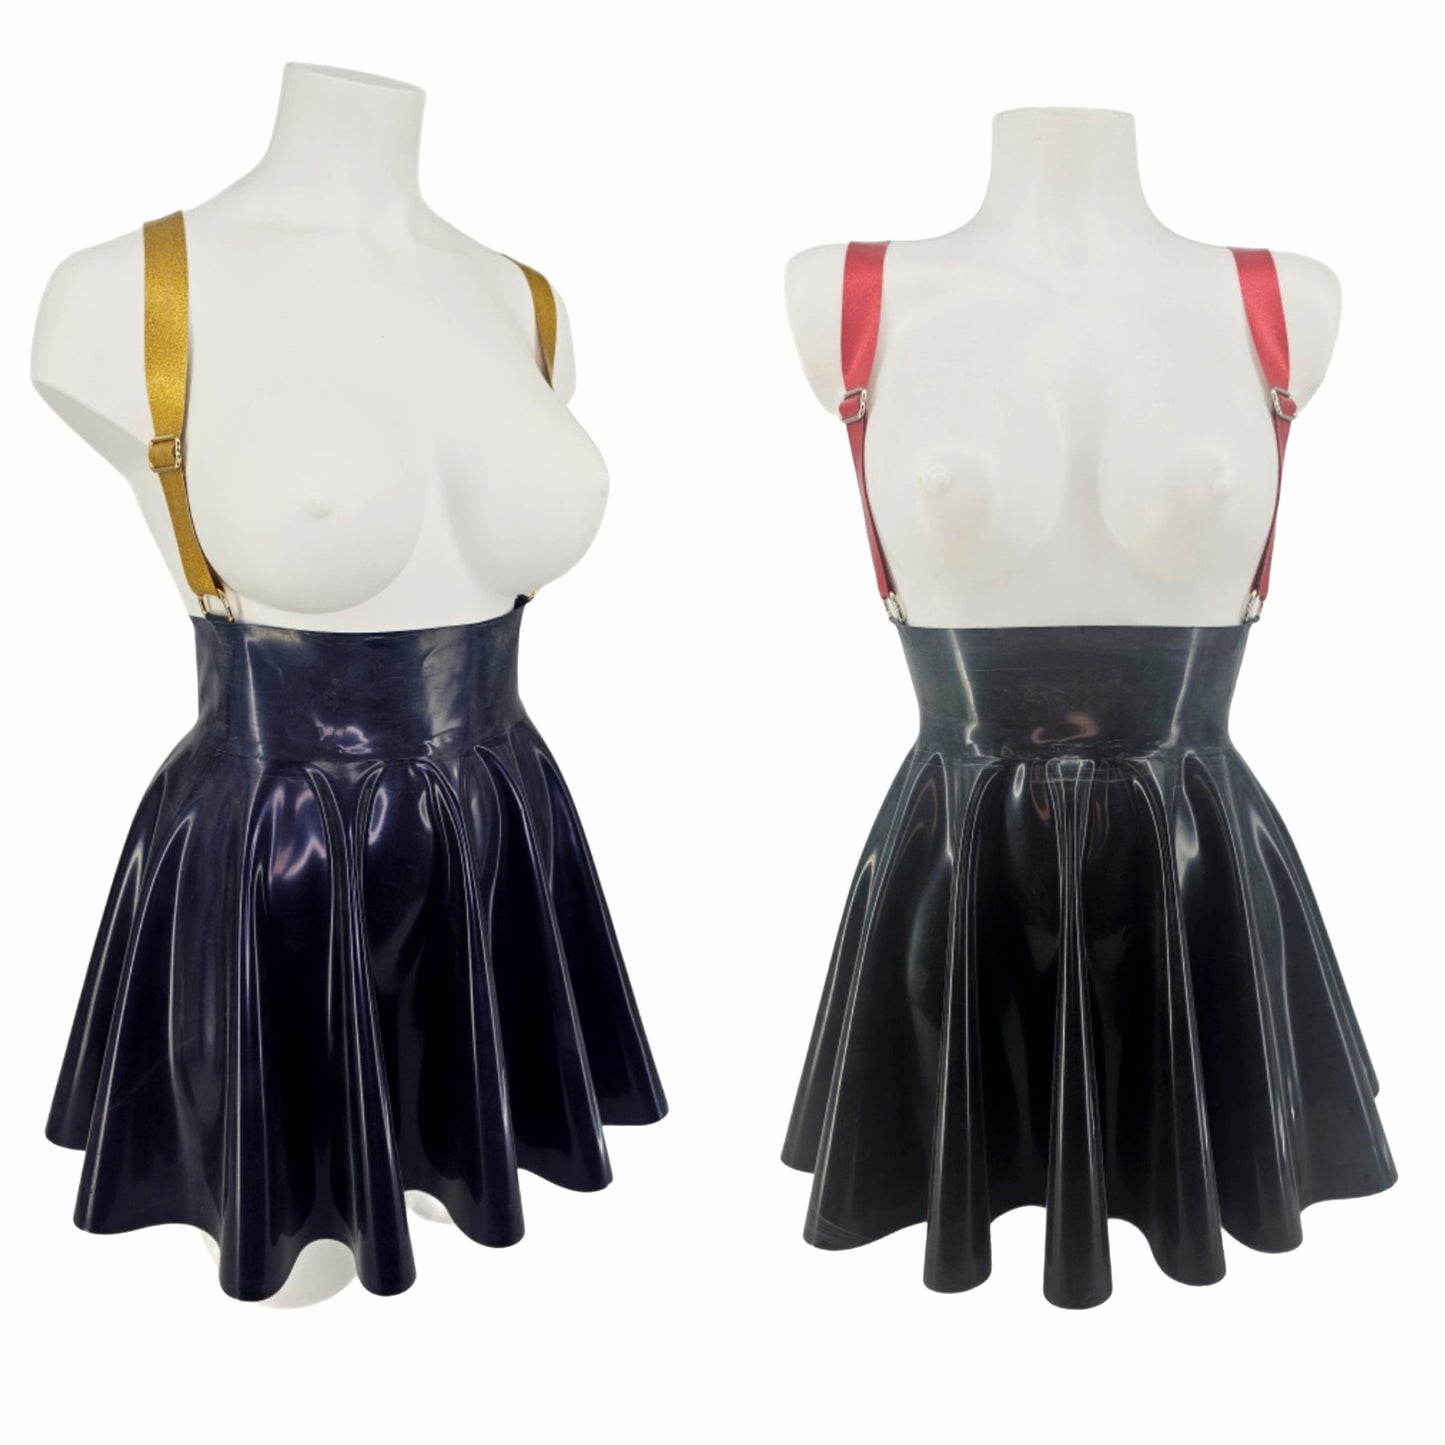 High waist latex full circle mini skater skirt with adjustable braces (silver, gold or rainbow rings)